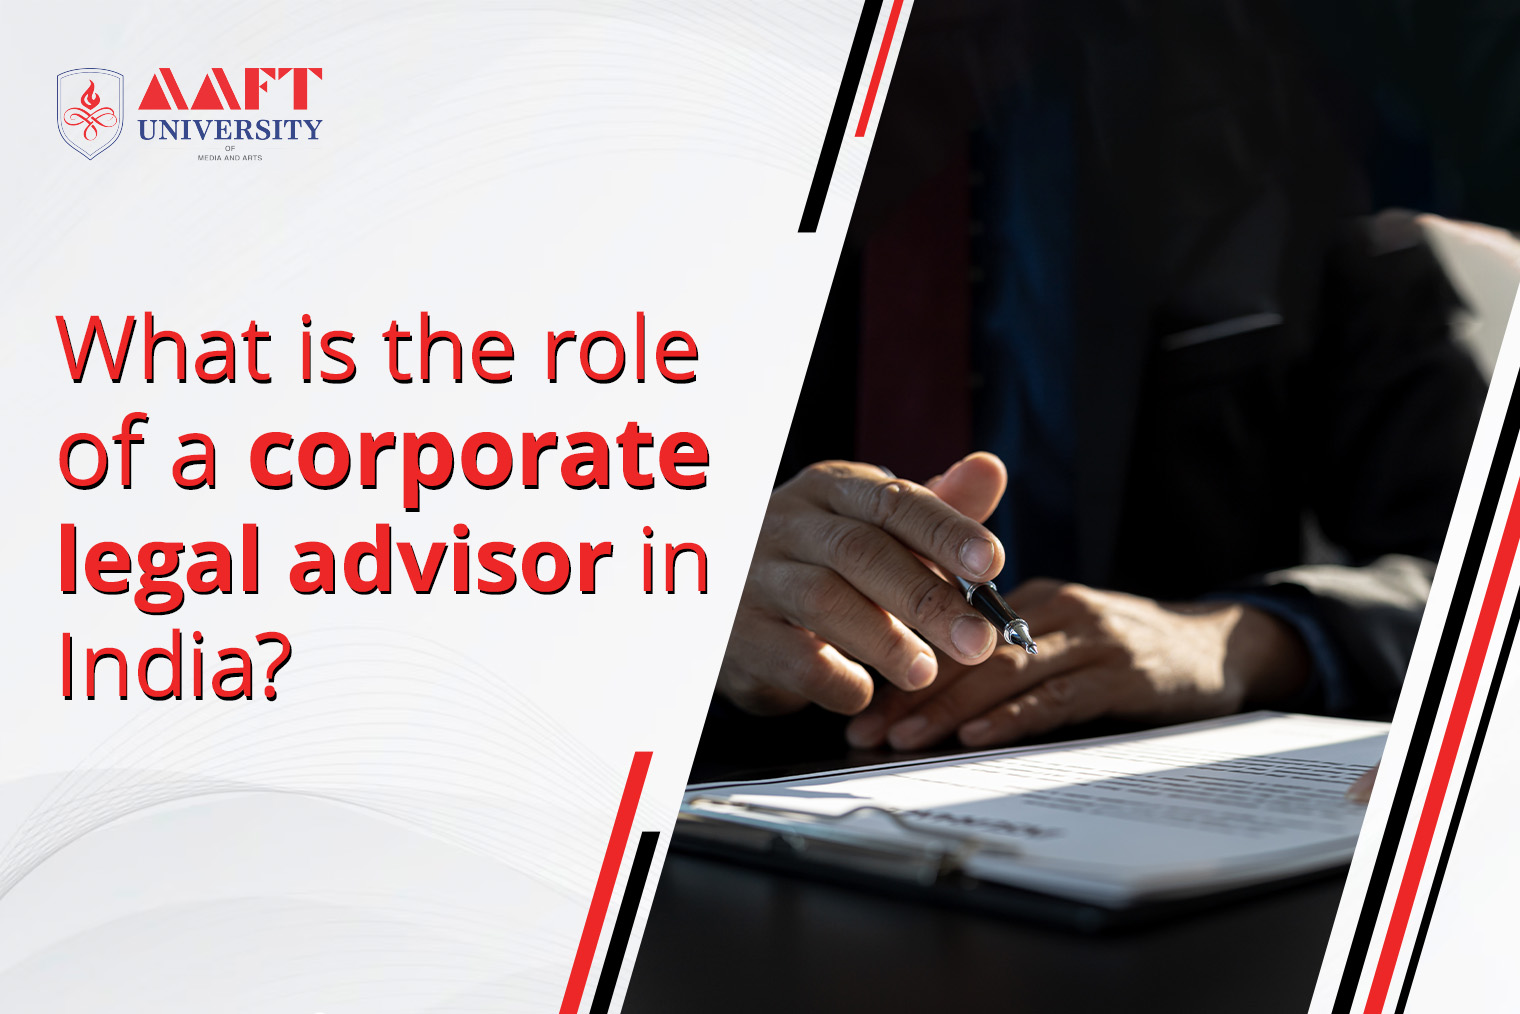 What is the role of a corporate legal advisor in India?